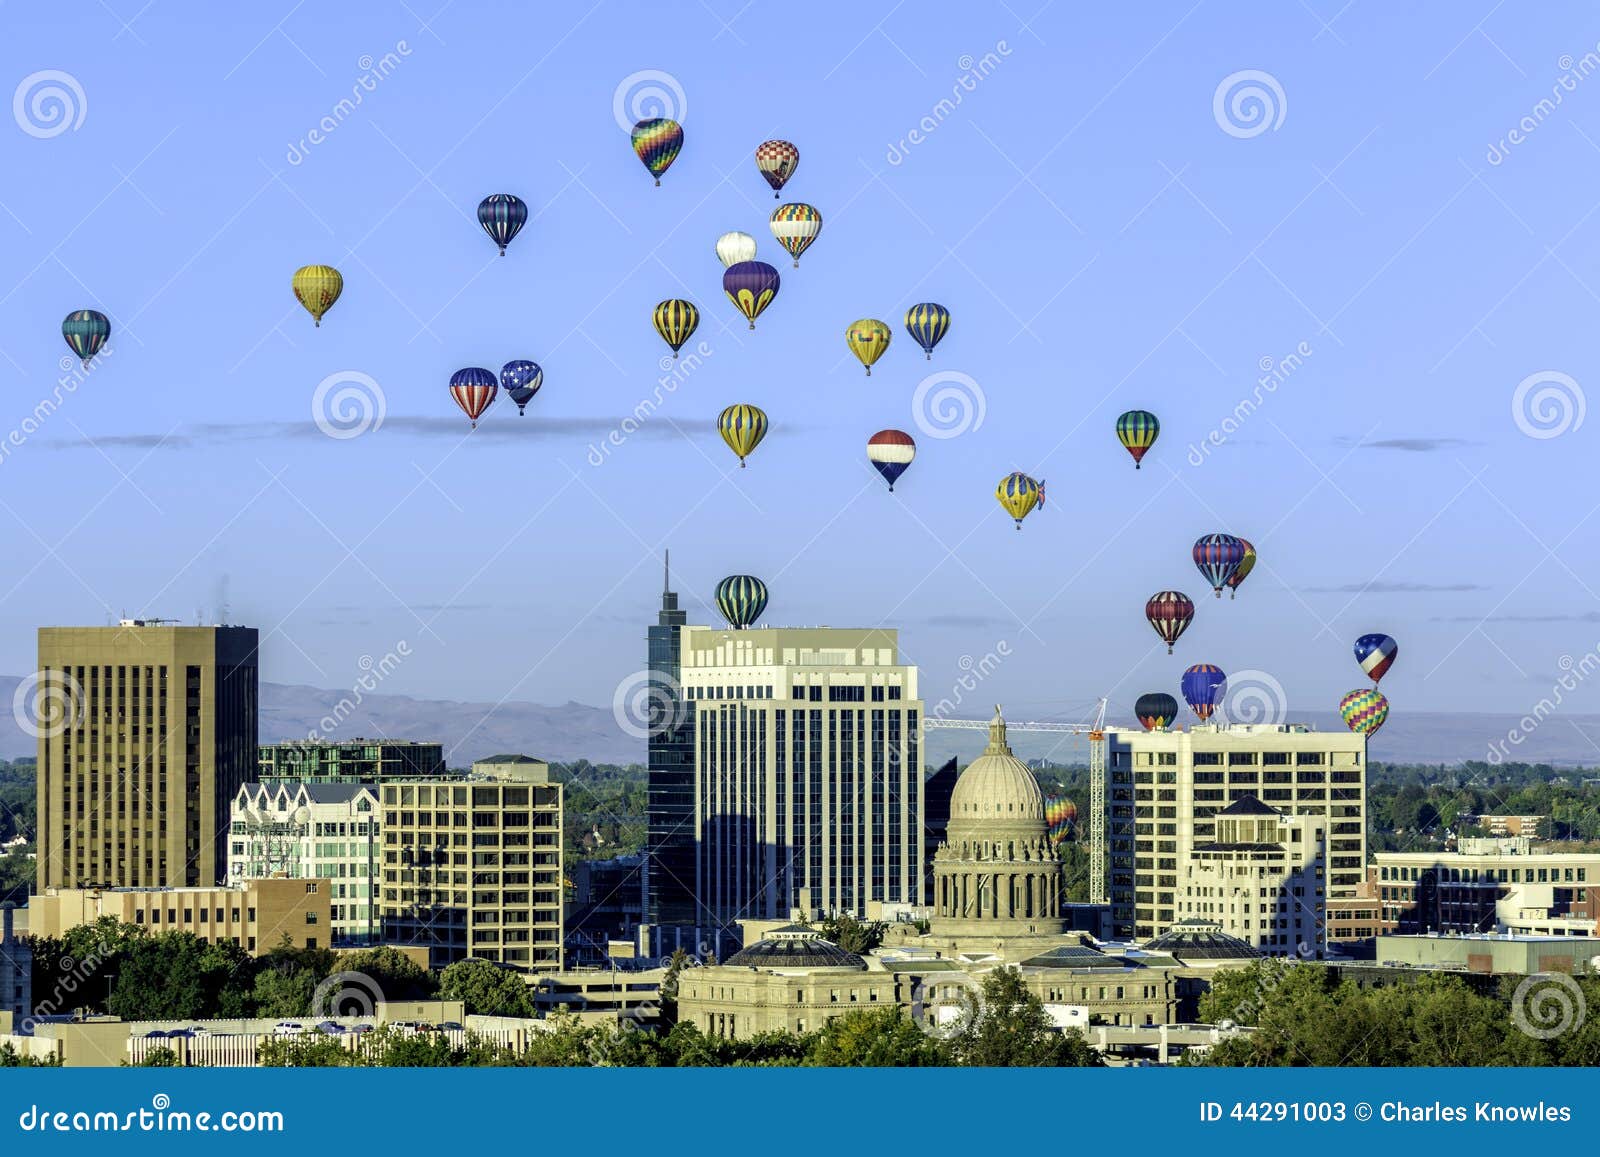 many hot air ballons over the city of boise idaho